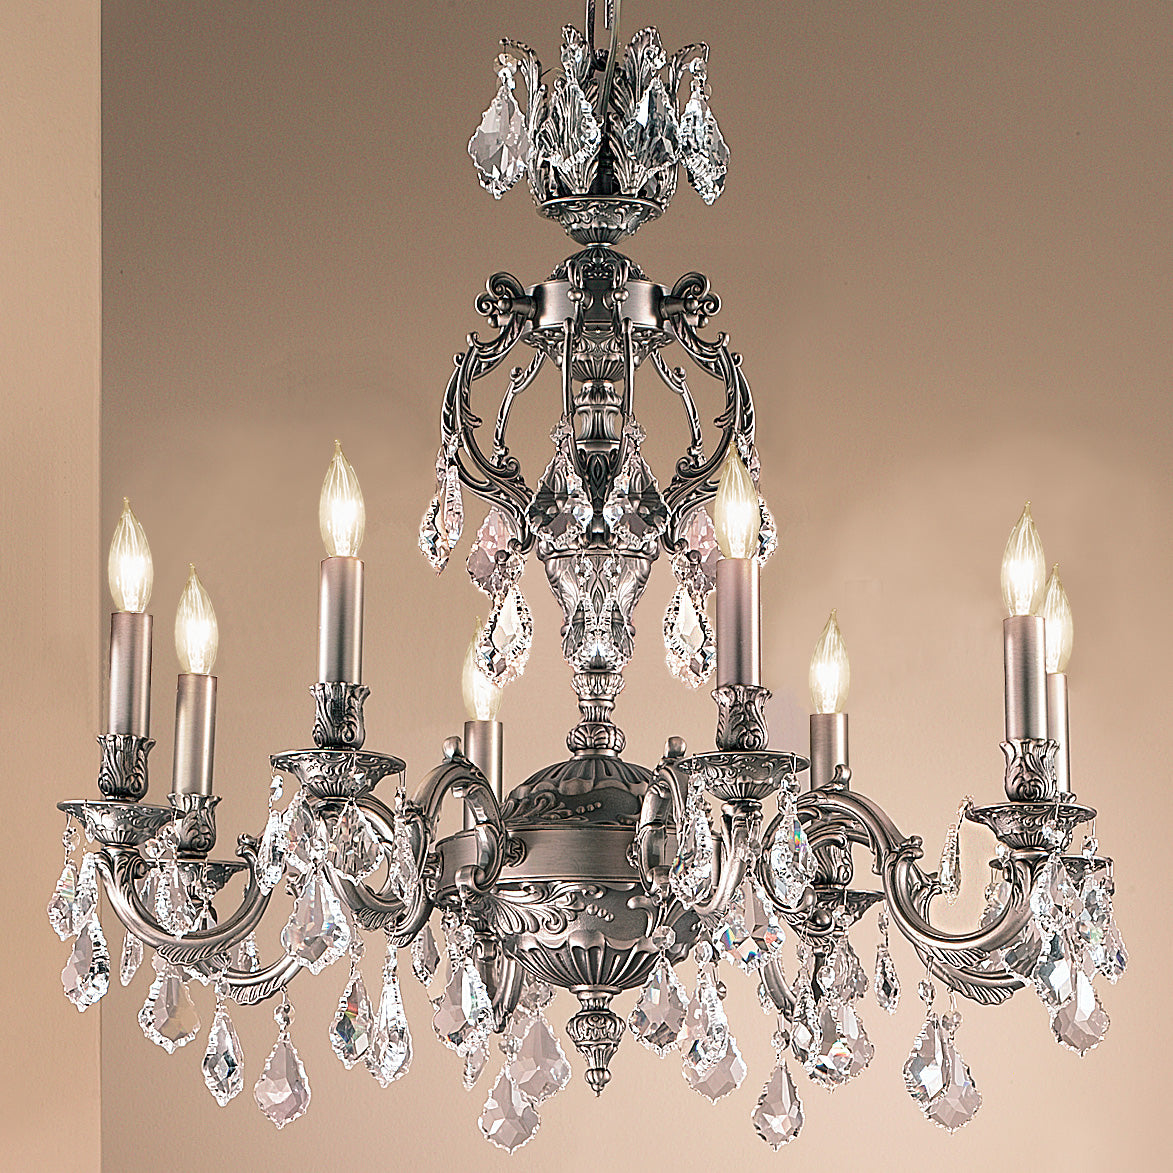 Classic Lighting 57378 AGB CGT Chateau Crystal Chandelier in Aged Bronze (Imported from Spain)